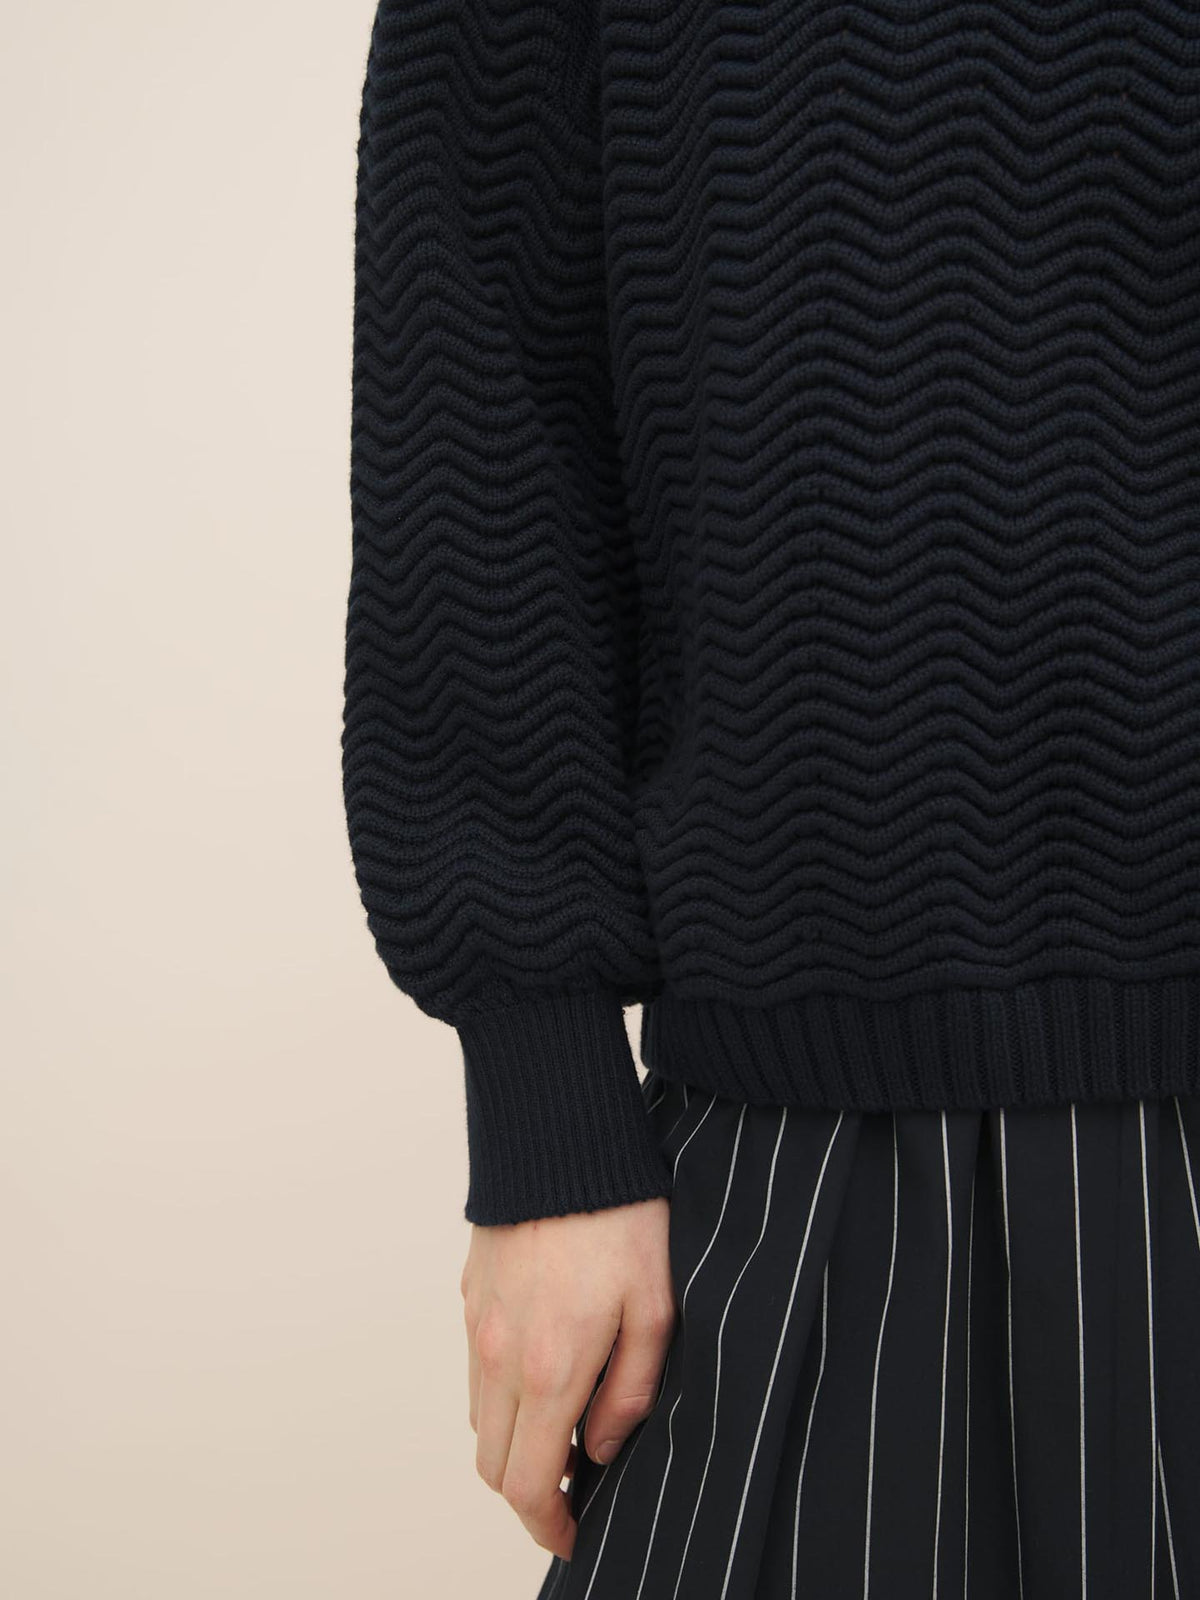 Close-up of a person wearing a Kowtow Zig Zag Crew – Indigo sweater and a black and white striped skirt.